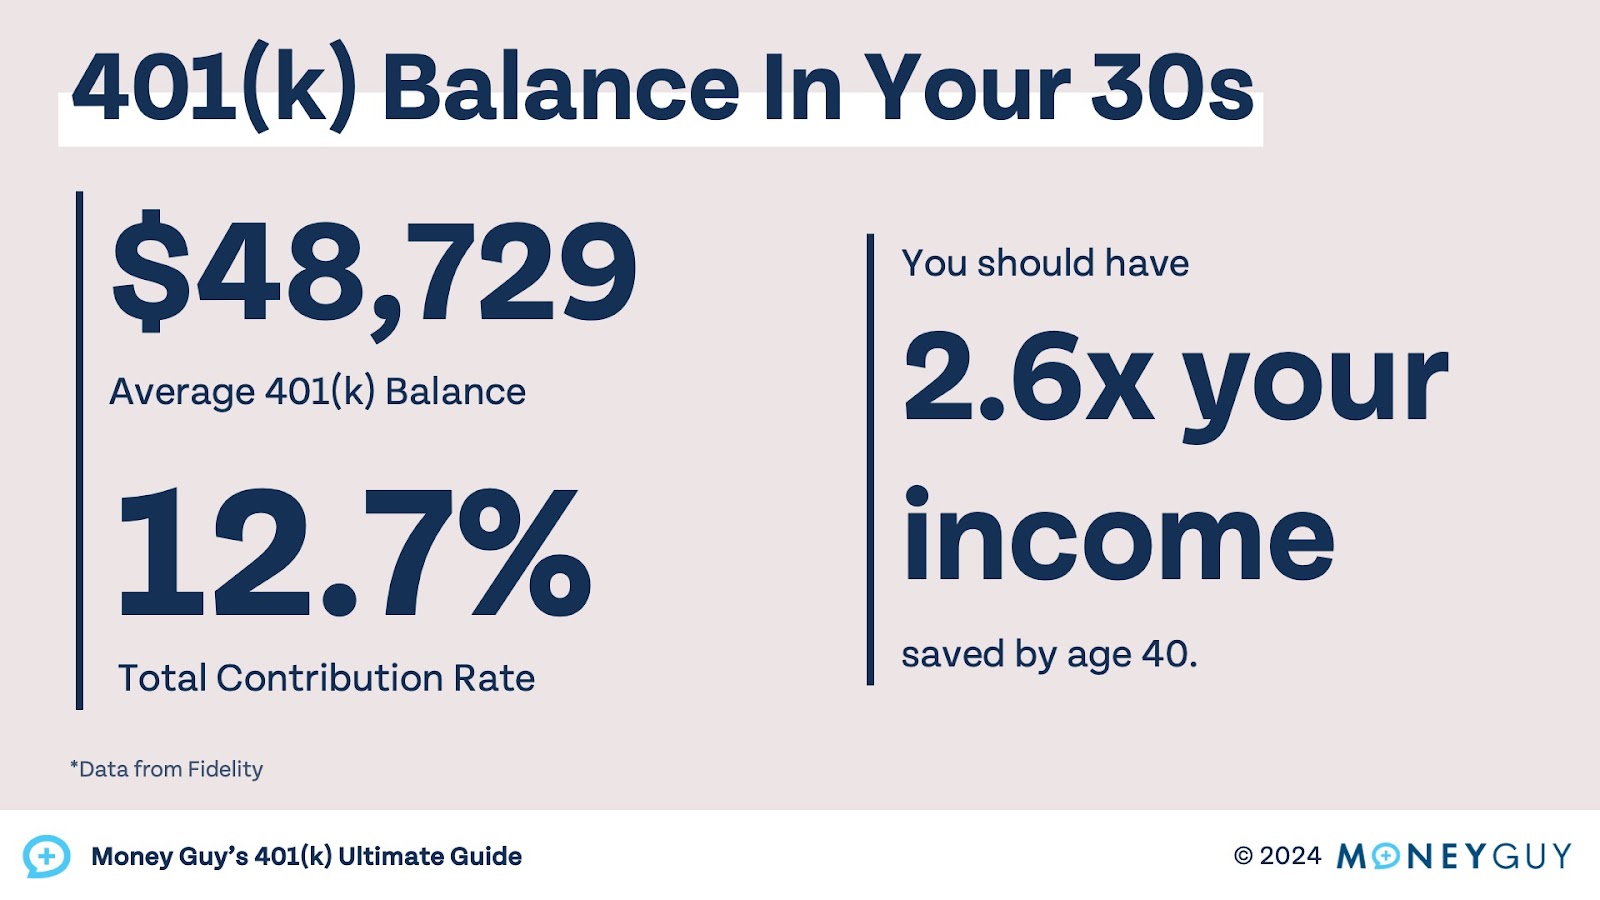 A chart showing the average 401(k) balance by age in your 30s.